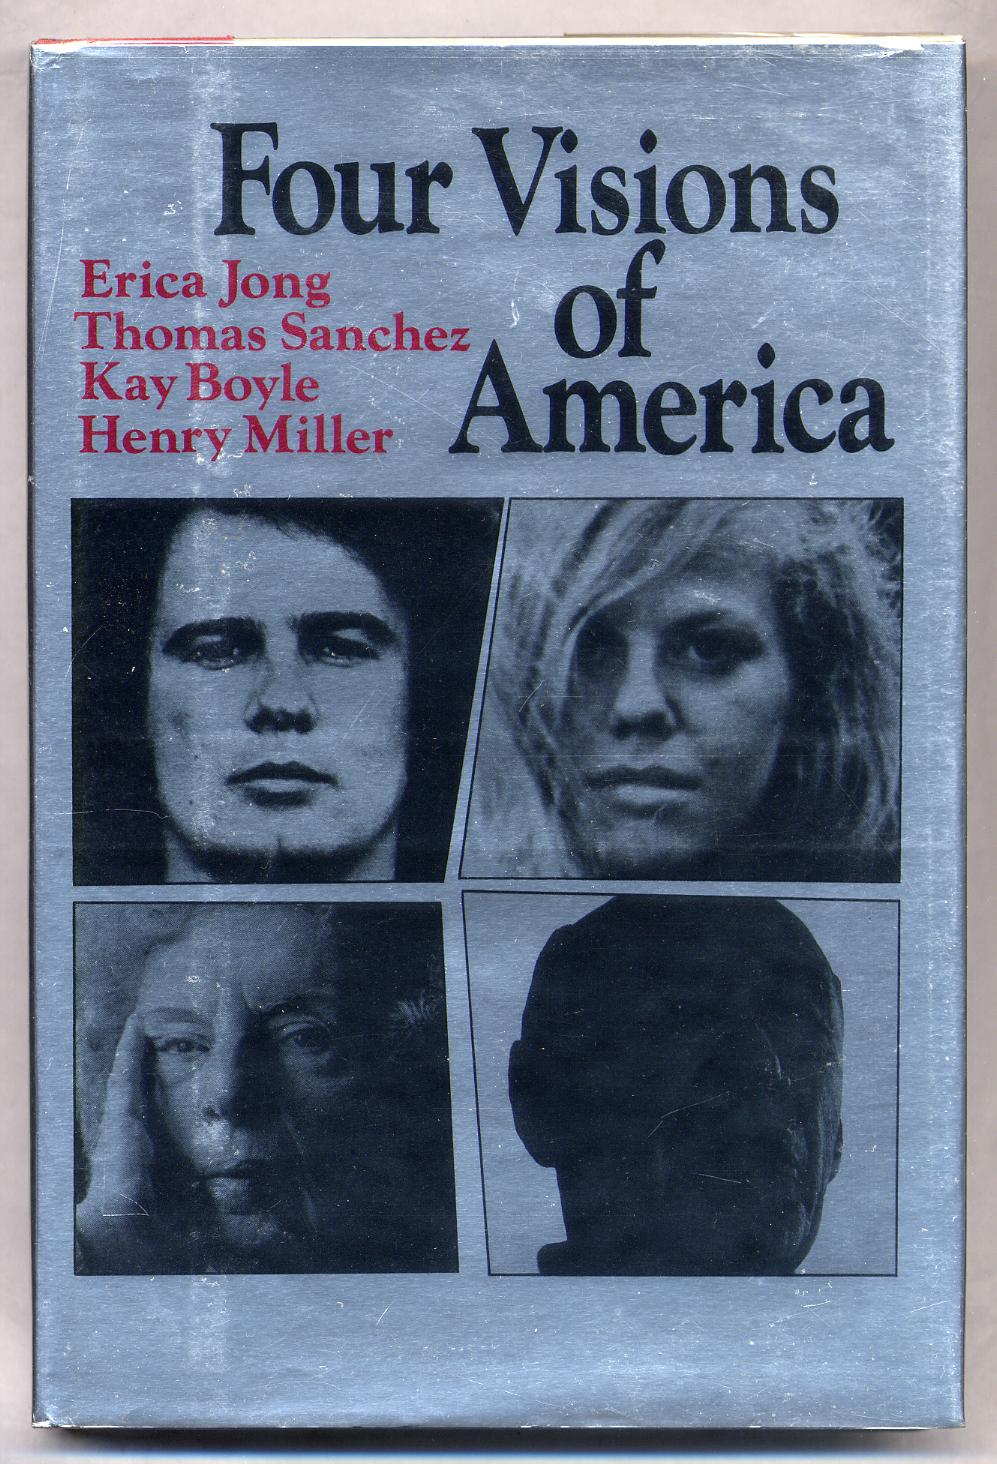 Four Visions of America - MILLER, Henry, Erica Jong, Thomas Sanchez and Kay Boyle